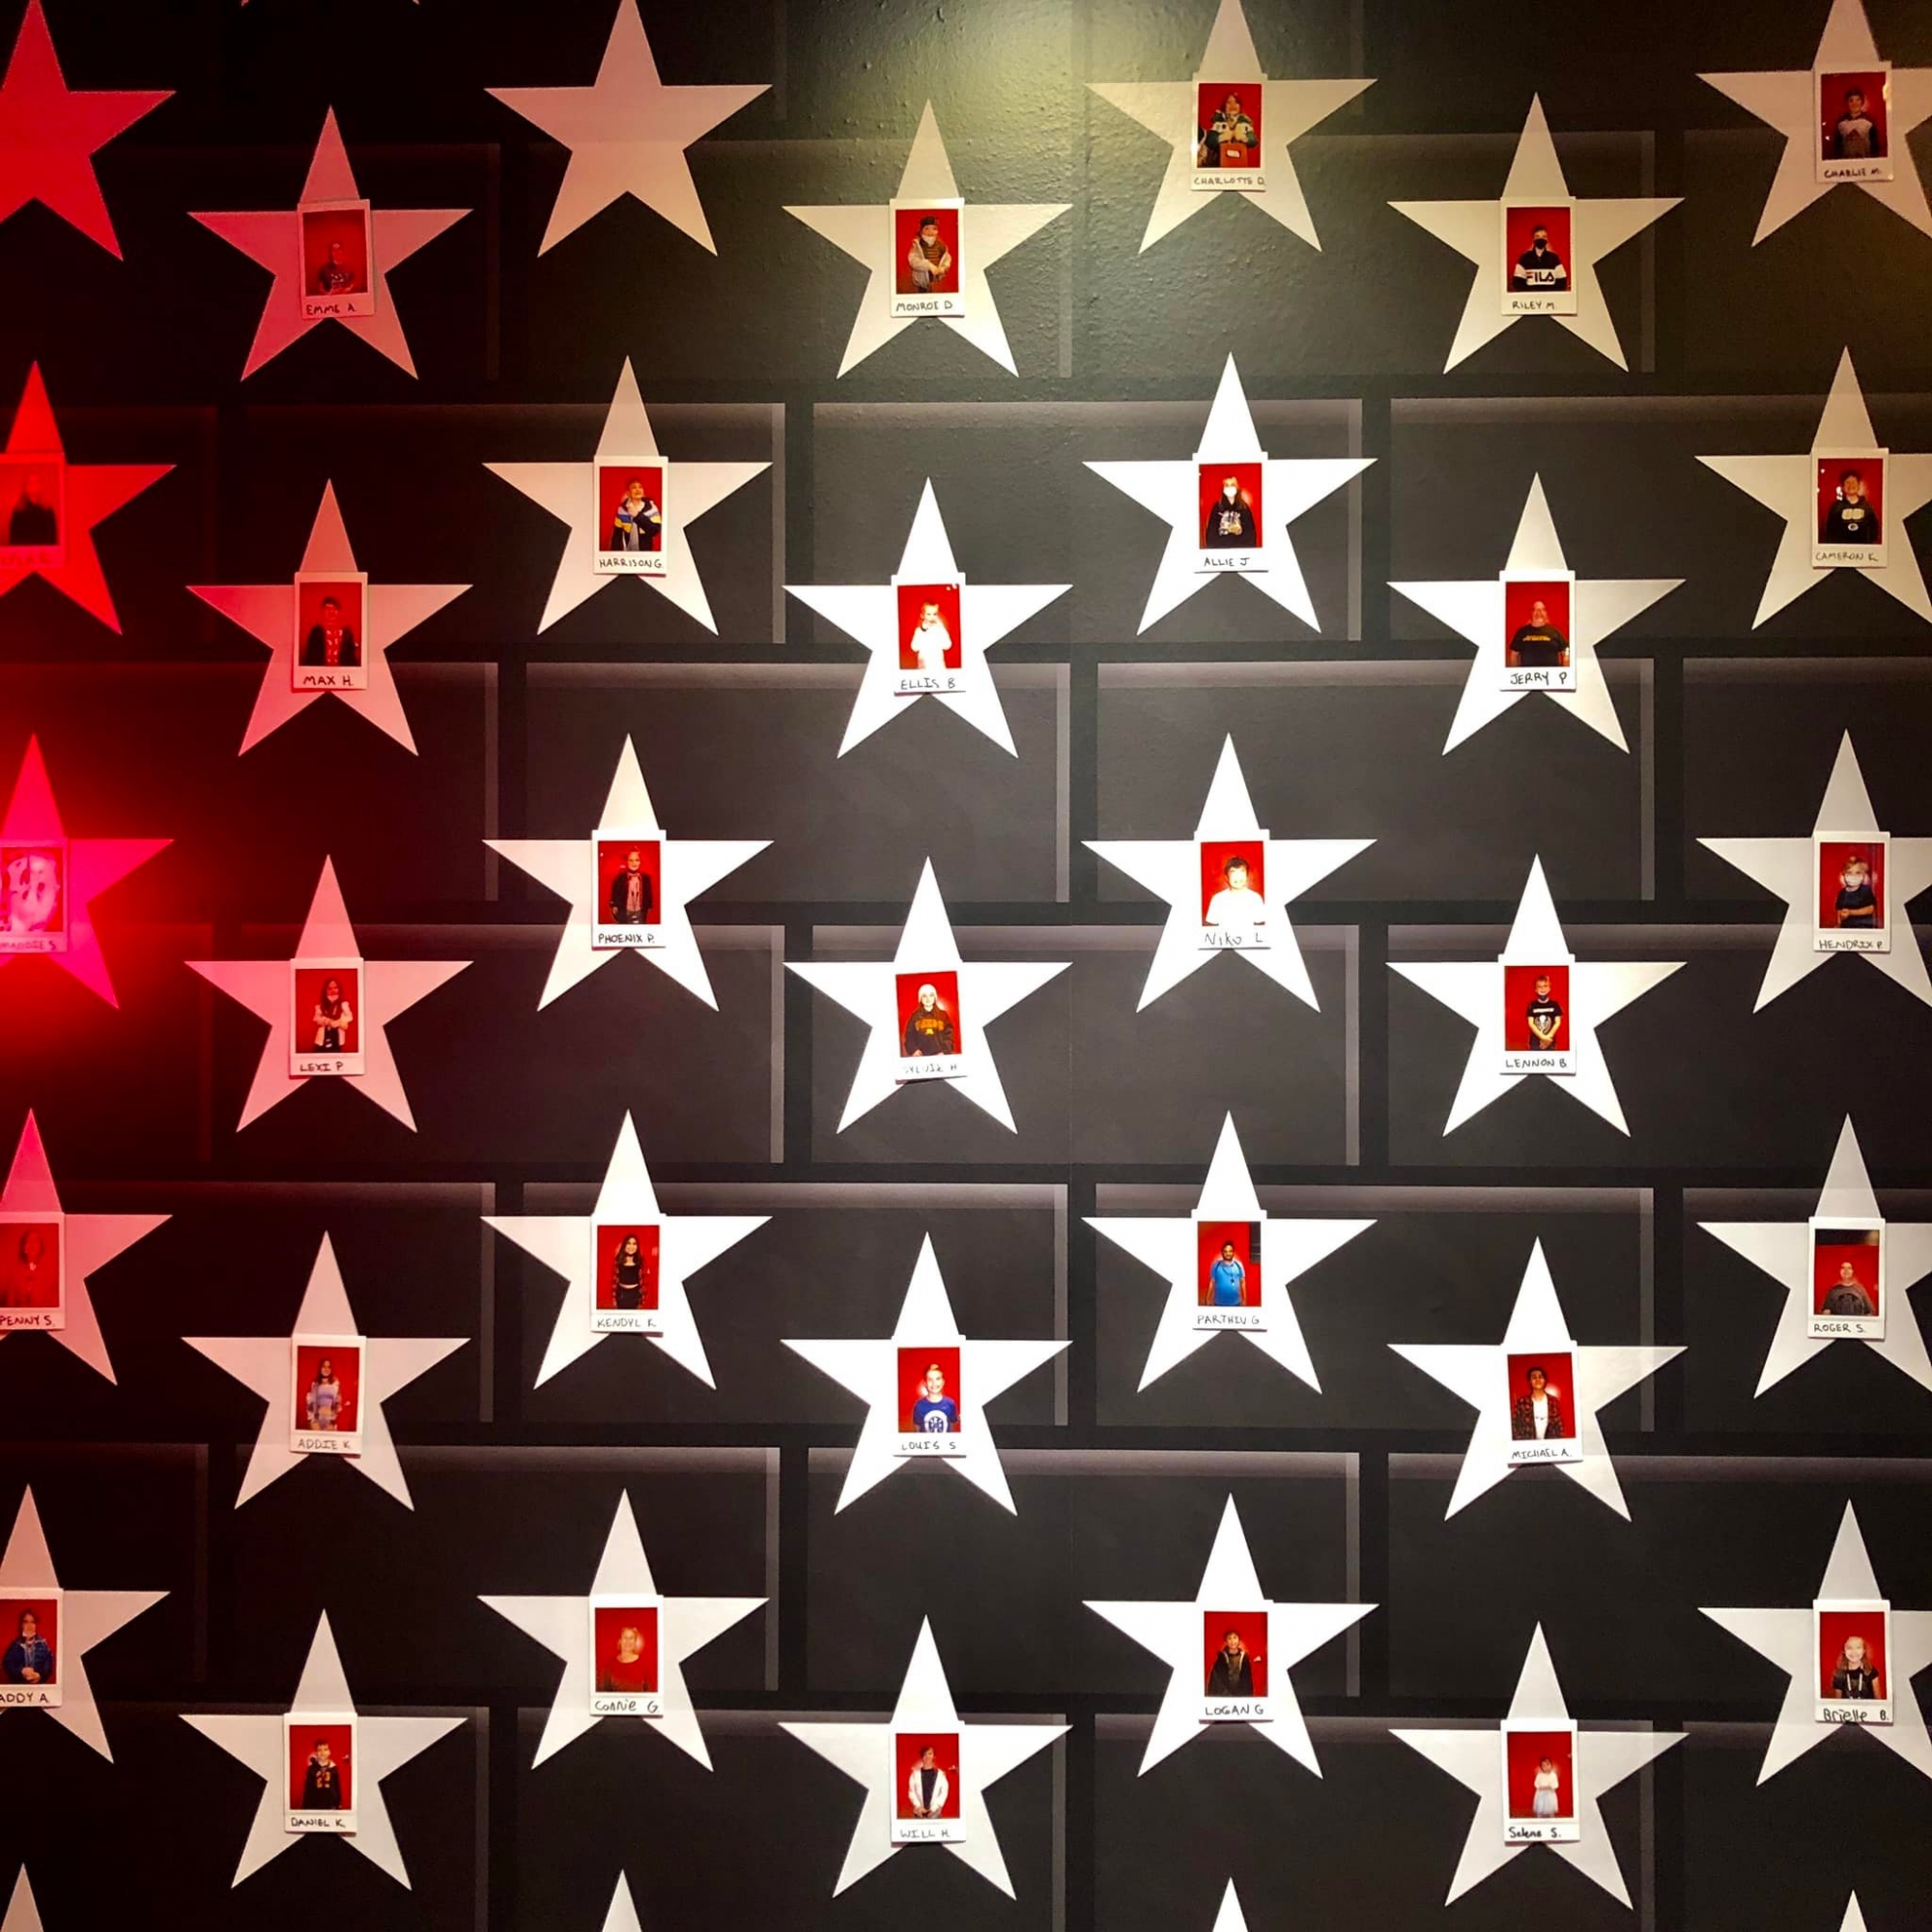 Our student STAR WALL